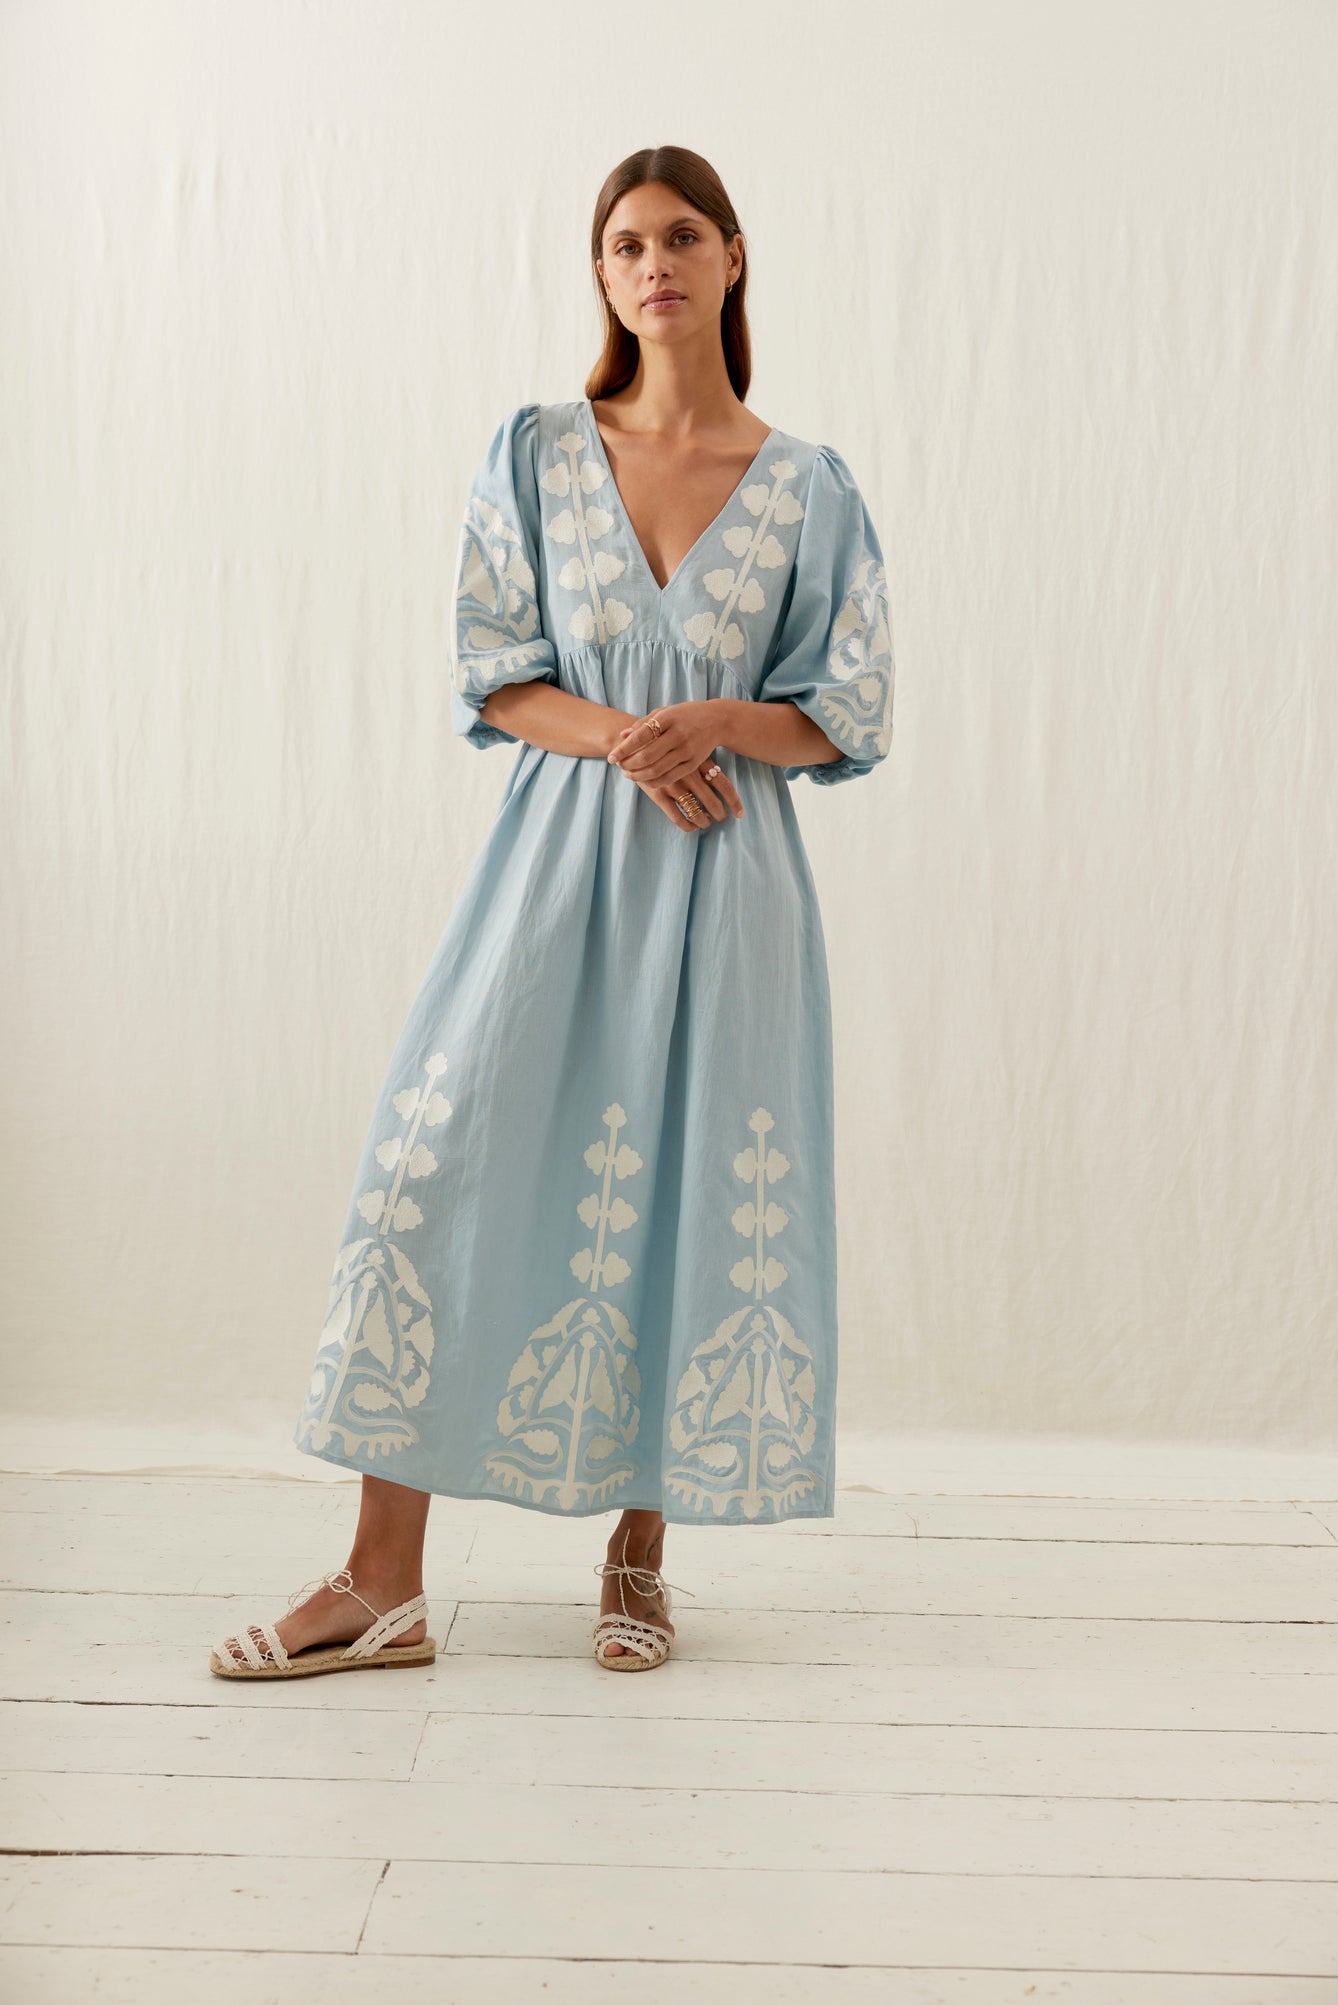 This women maxi dress of cotton in blue summer skies colour is the best summer dress with open back details. The Ilana maxi dress has a deep plunging V-neck and stunning contracted embroideries on the front, bottom sleeves. This women's summer maxi dress, a perfect addition to any capsule wardrobe, shop women fashion.